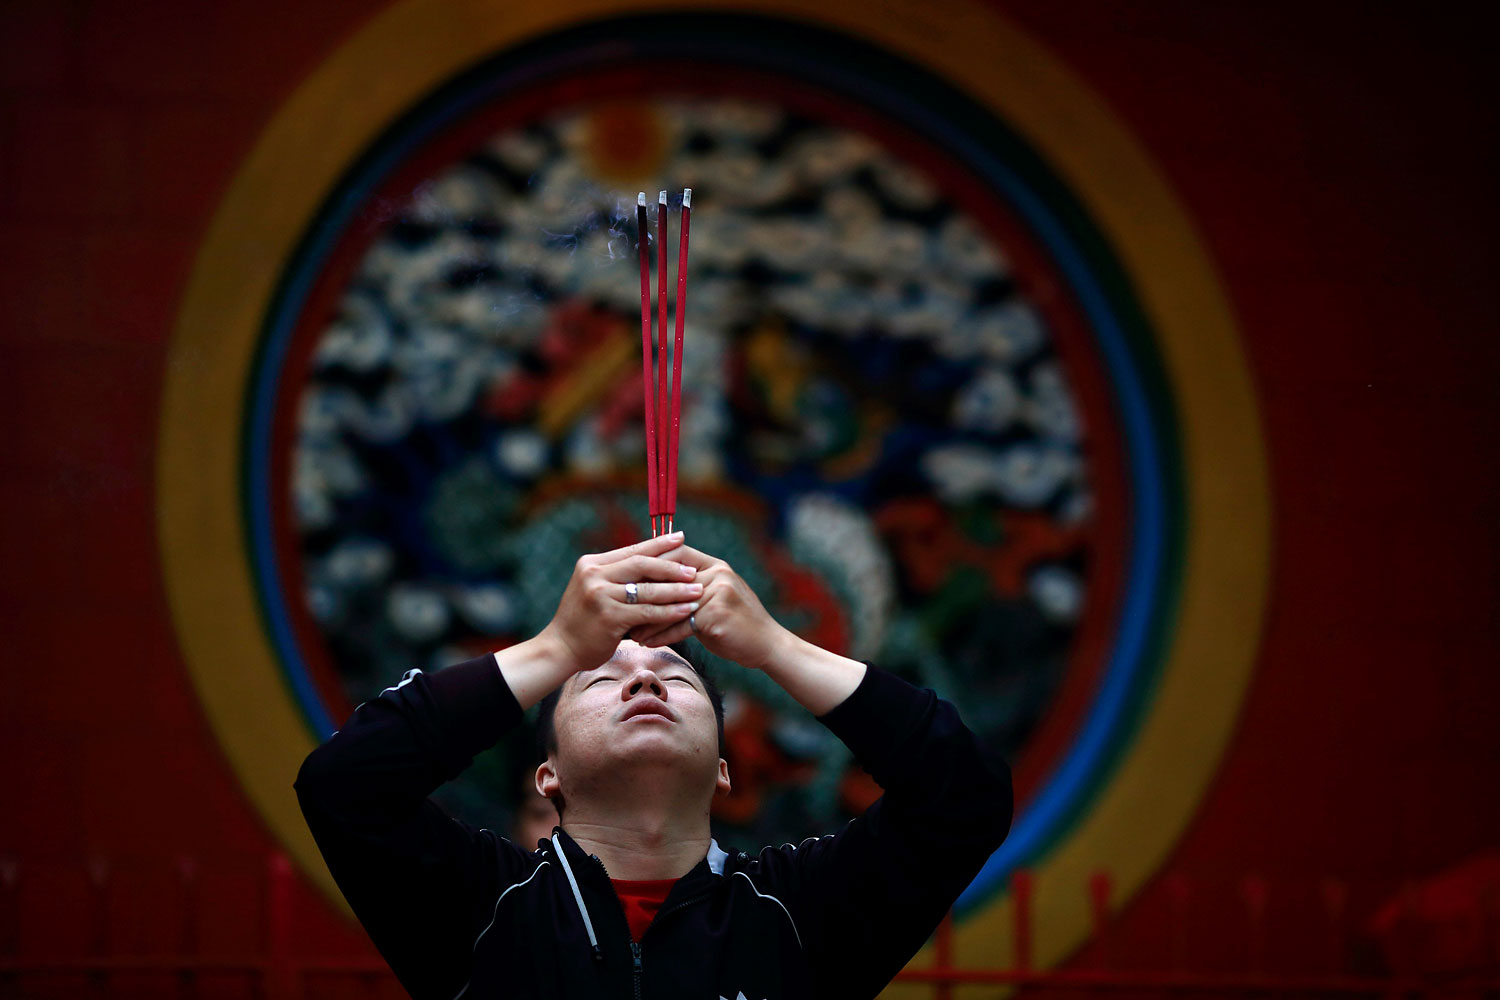 A man prays for good fortune while holding incense on the first day of the Chinese Lunar New Year at Petak Sembilan Temple, in Jakarta, Jan. 31, 2014.